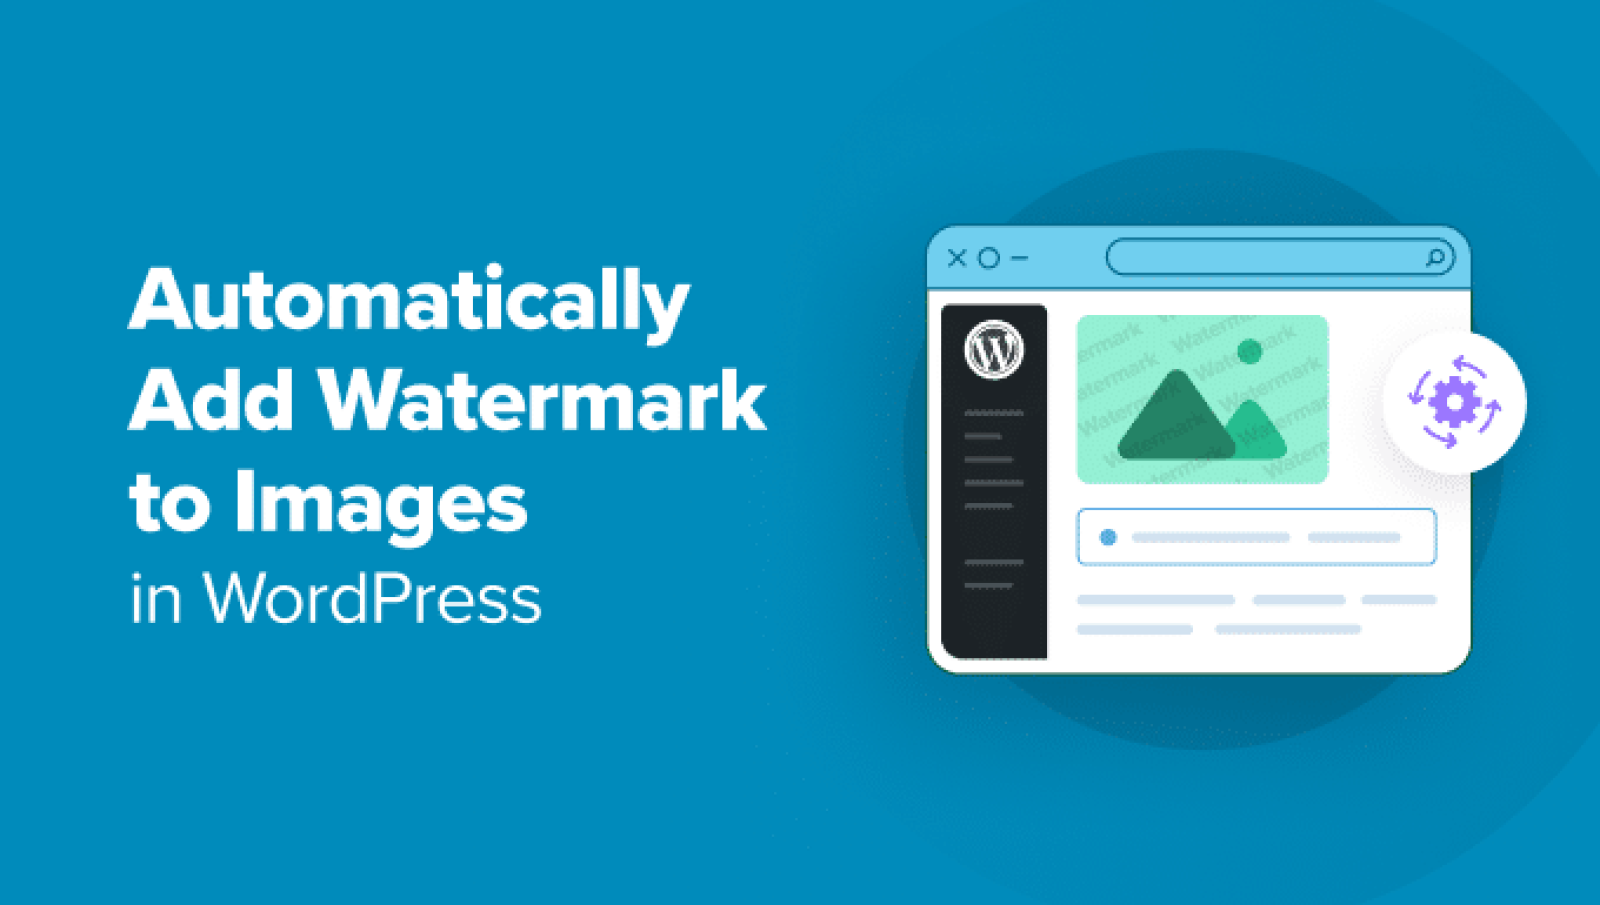 How you can Mechanically Add Watermark to Pictures in WordPress